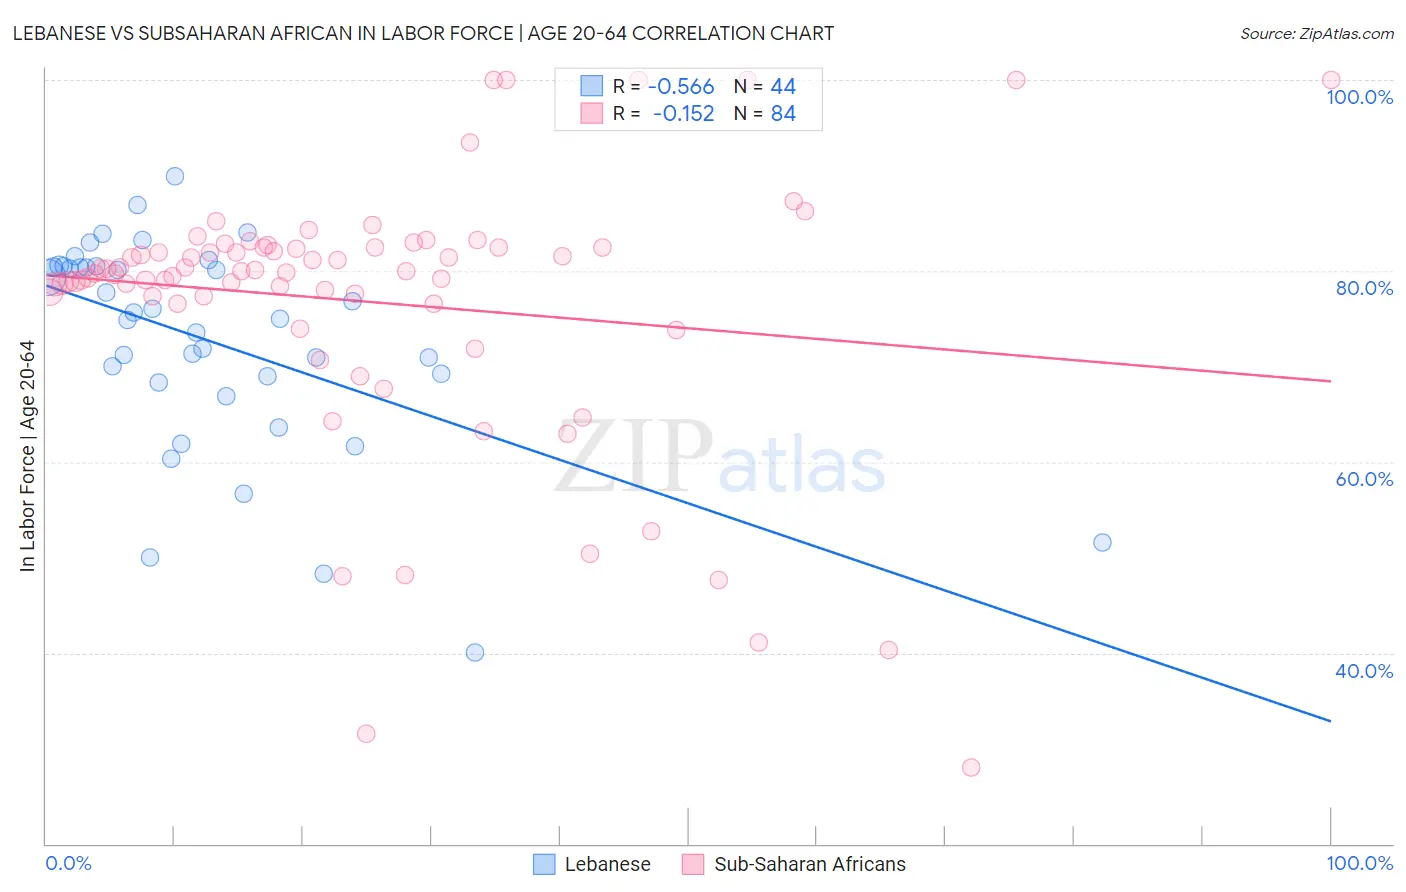 Lebanese vs Subsaharan African In Labor Force | Age 20-64